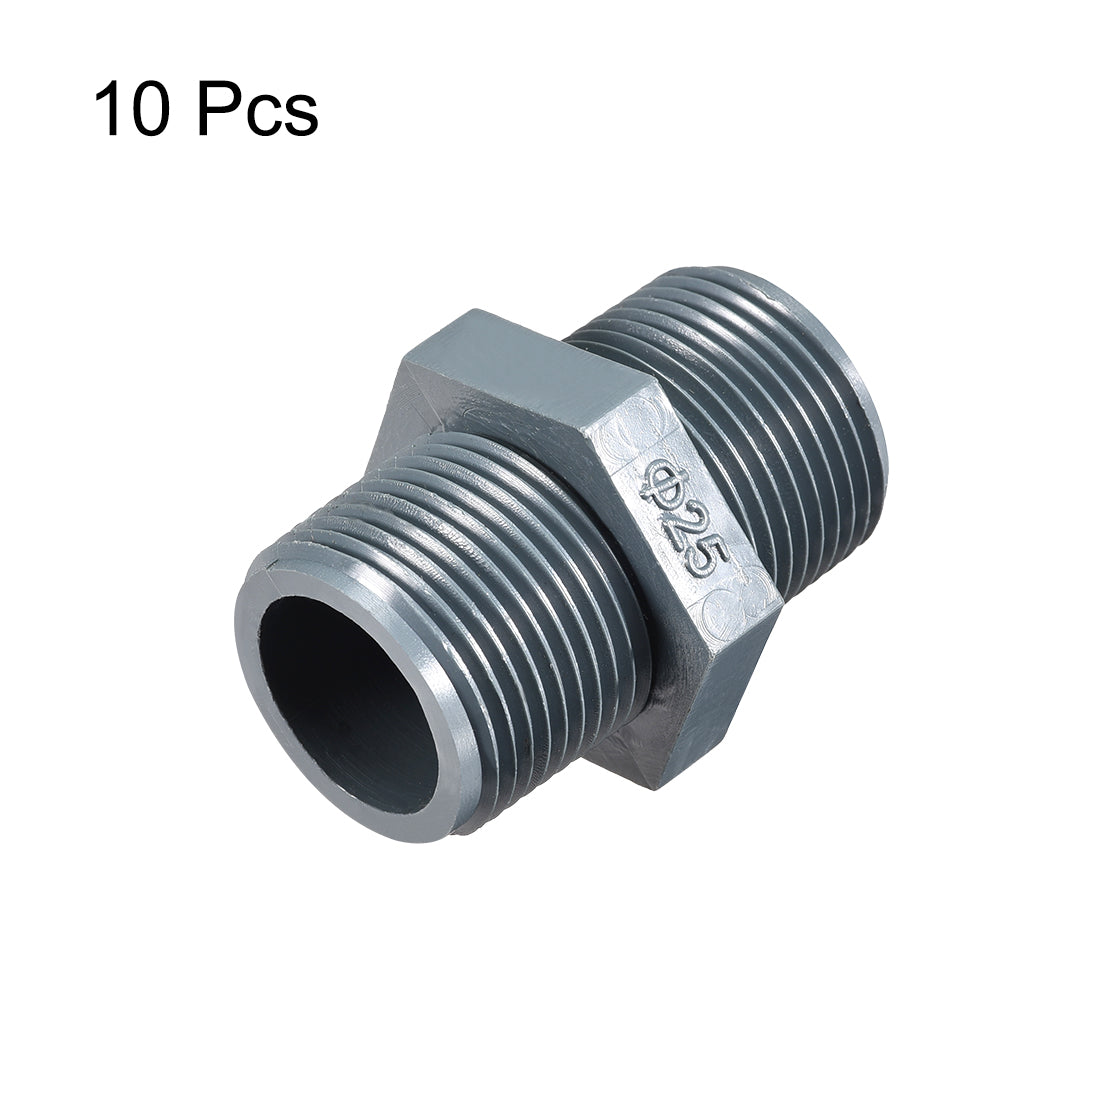 uxcell Uxcell Pipe Fittings Connector G3/4xG3/4 Male Thread Adapter Plastic Hex Connector 10pcs